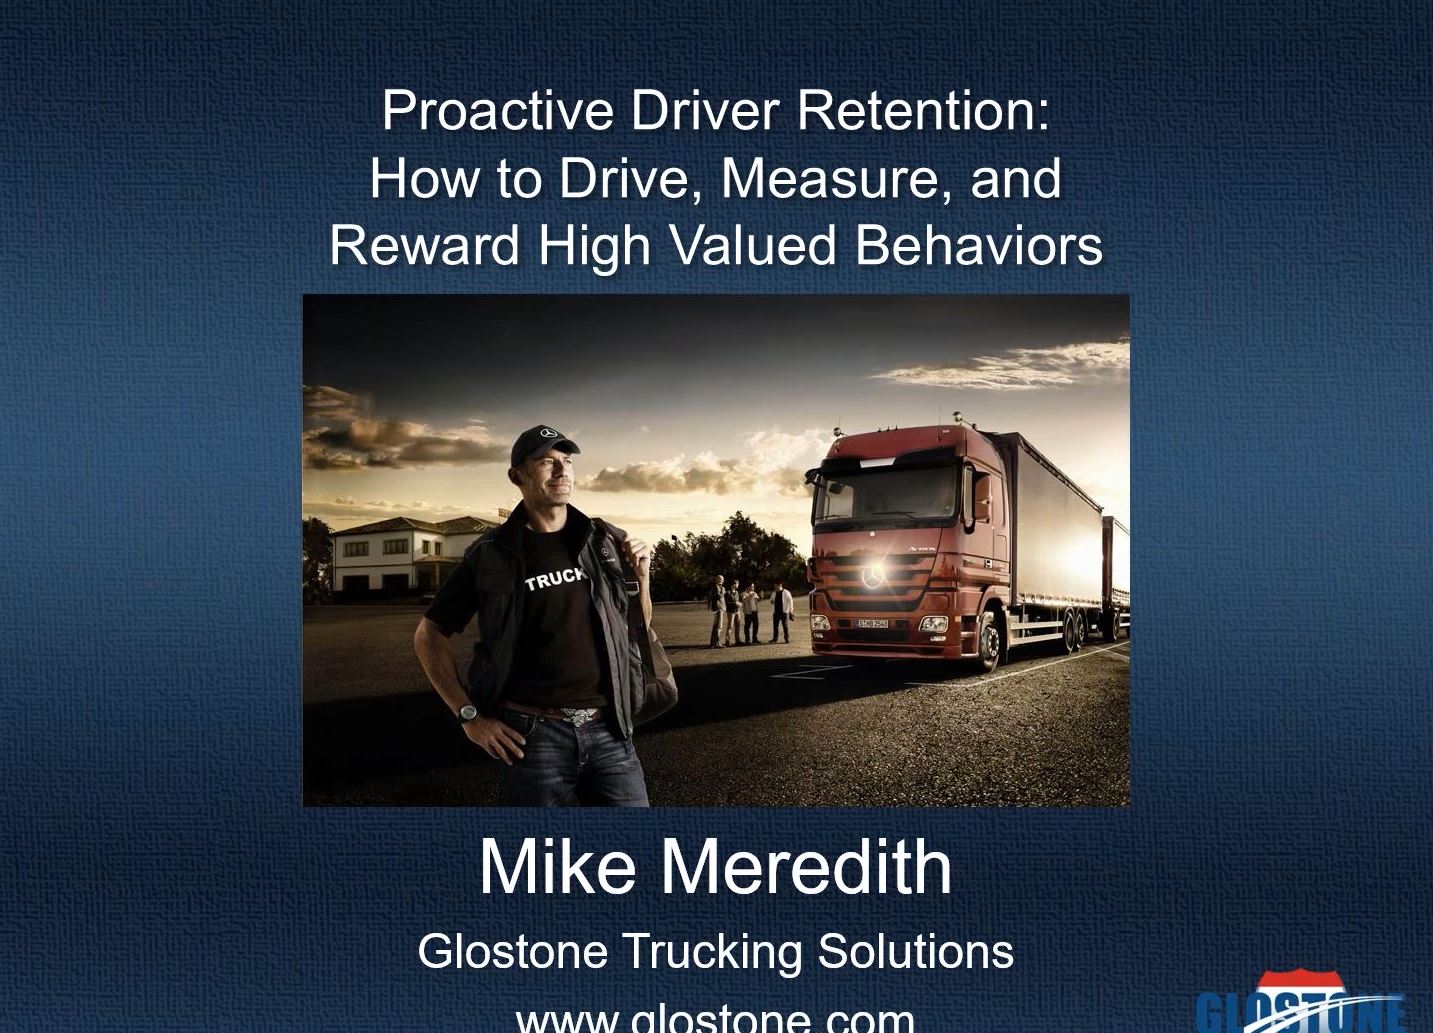 July 2018 webinar: Proactive Driver Retention: How to Drive, Measure, and Reward High Valued Behaviors